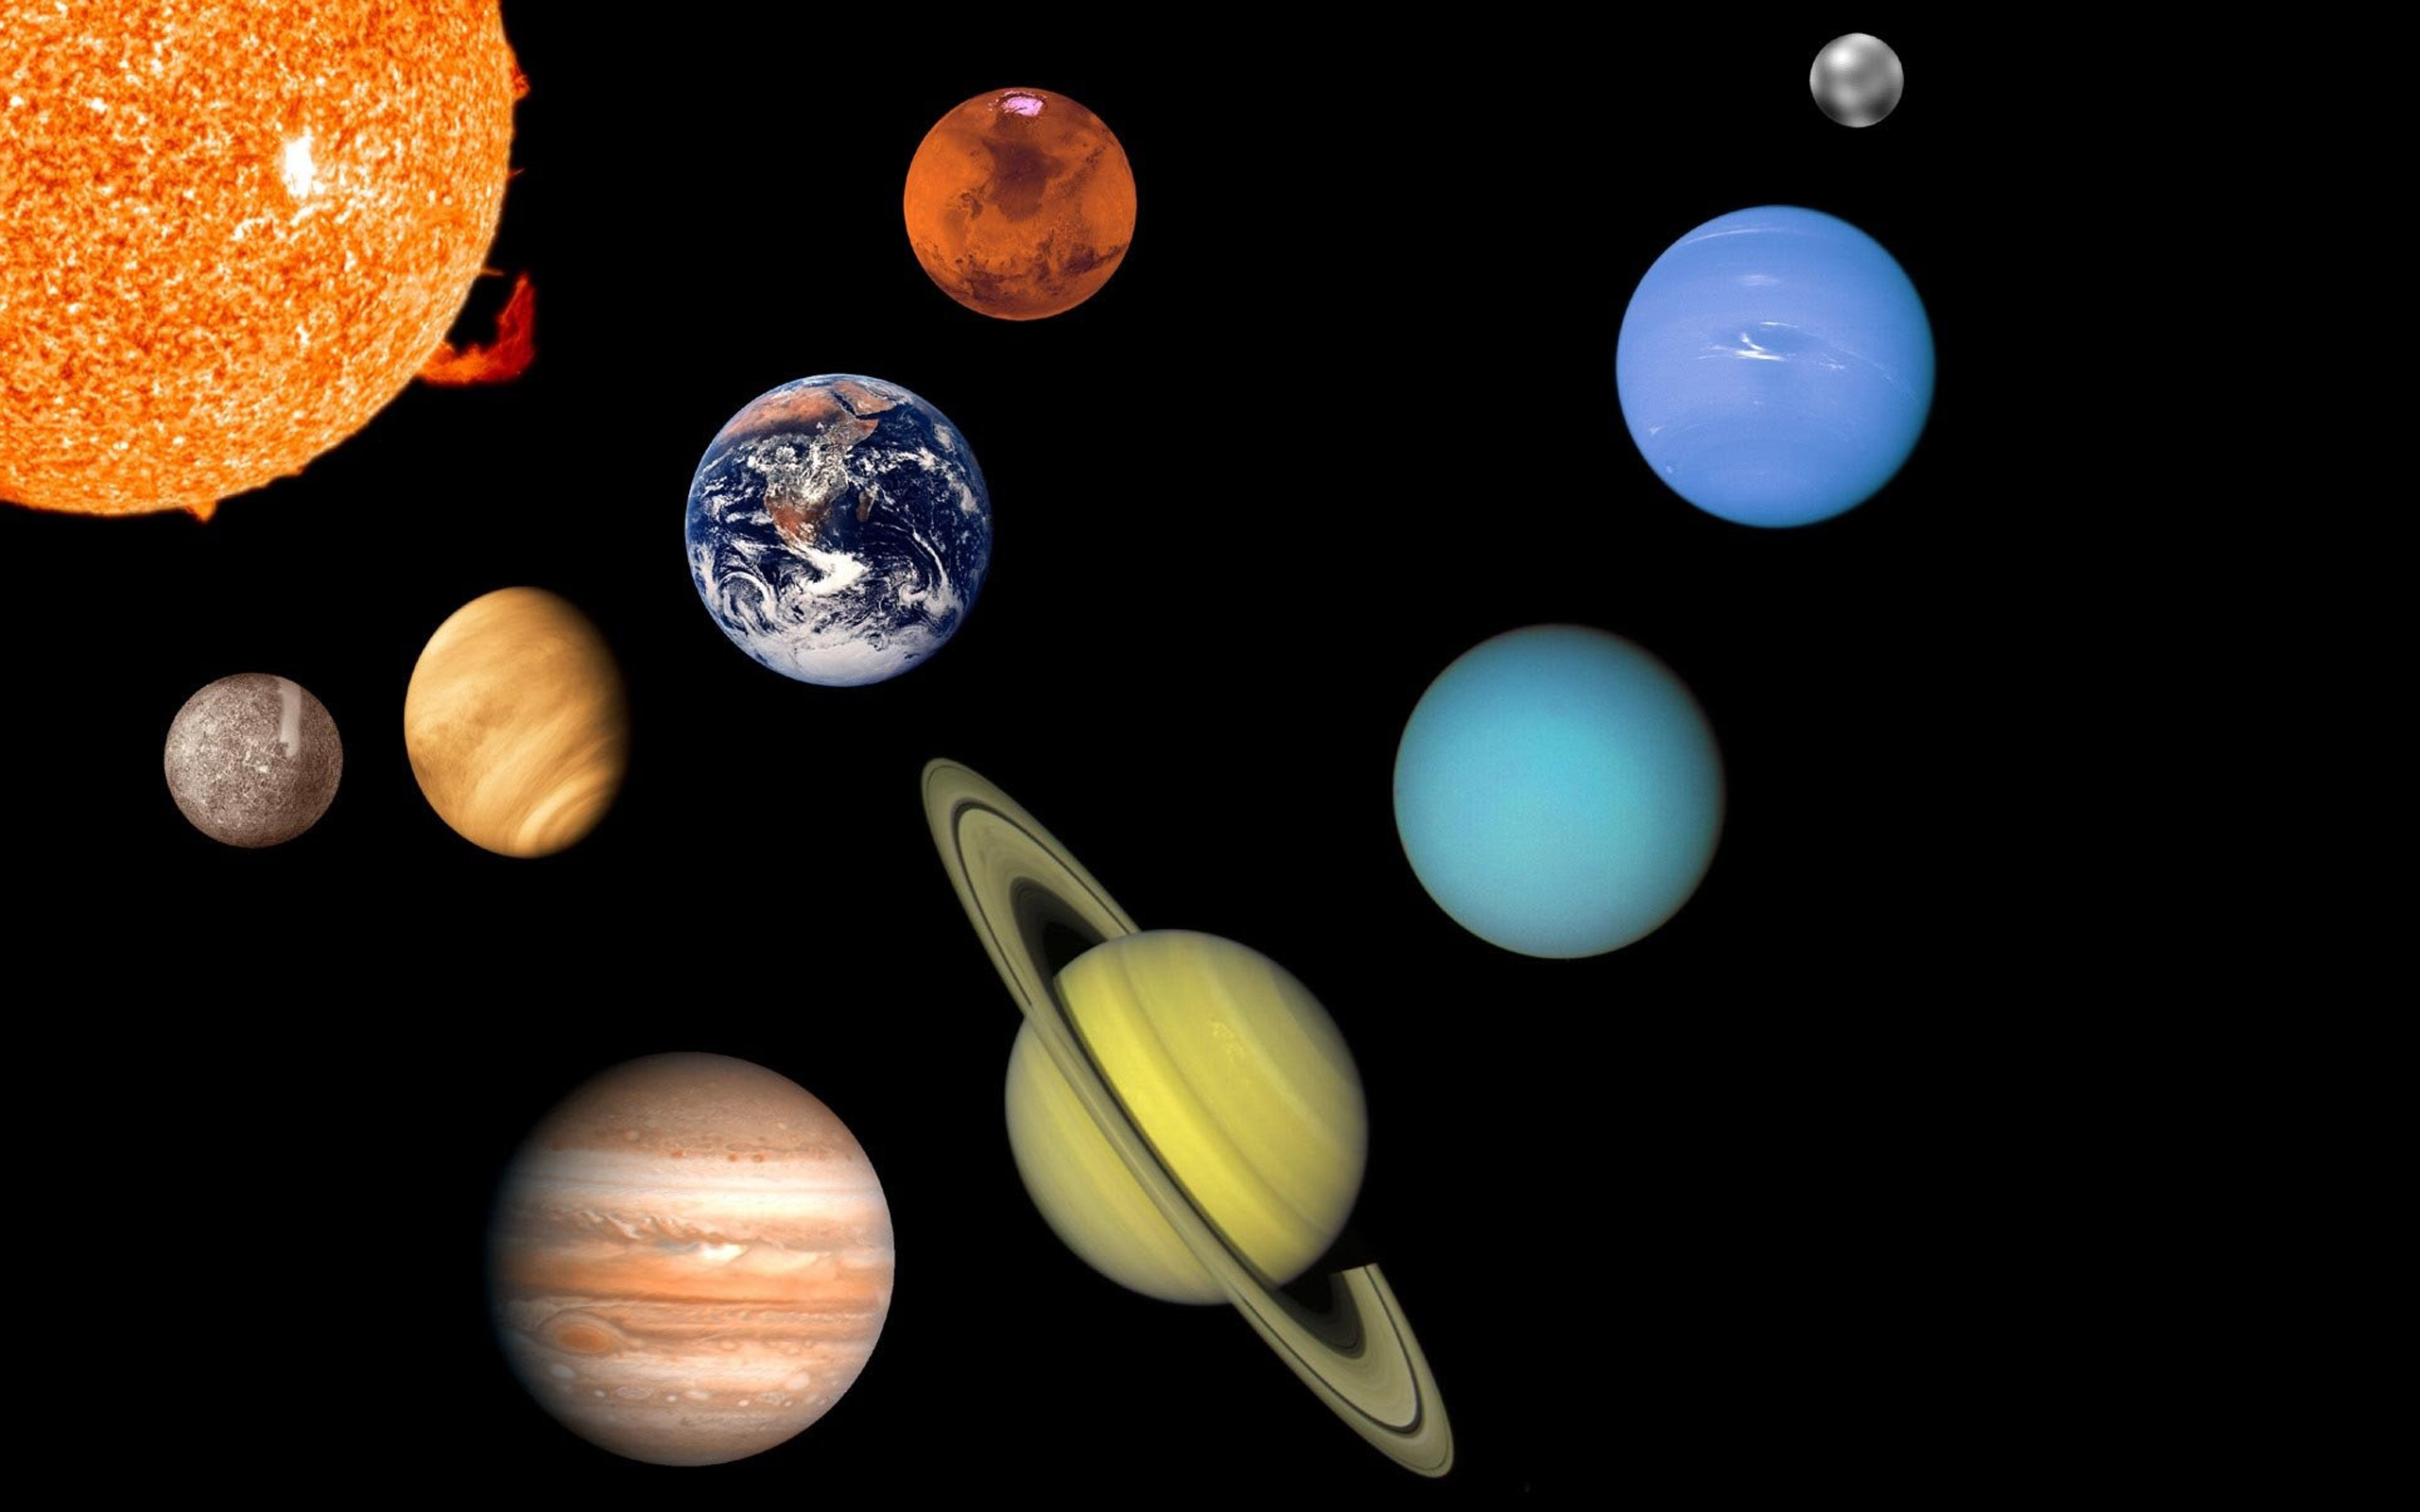 The Solar System Wallpapers